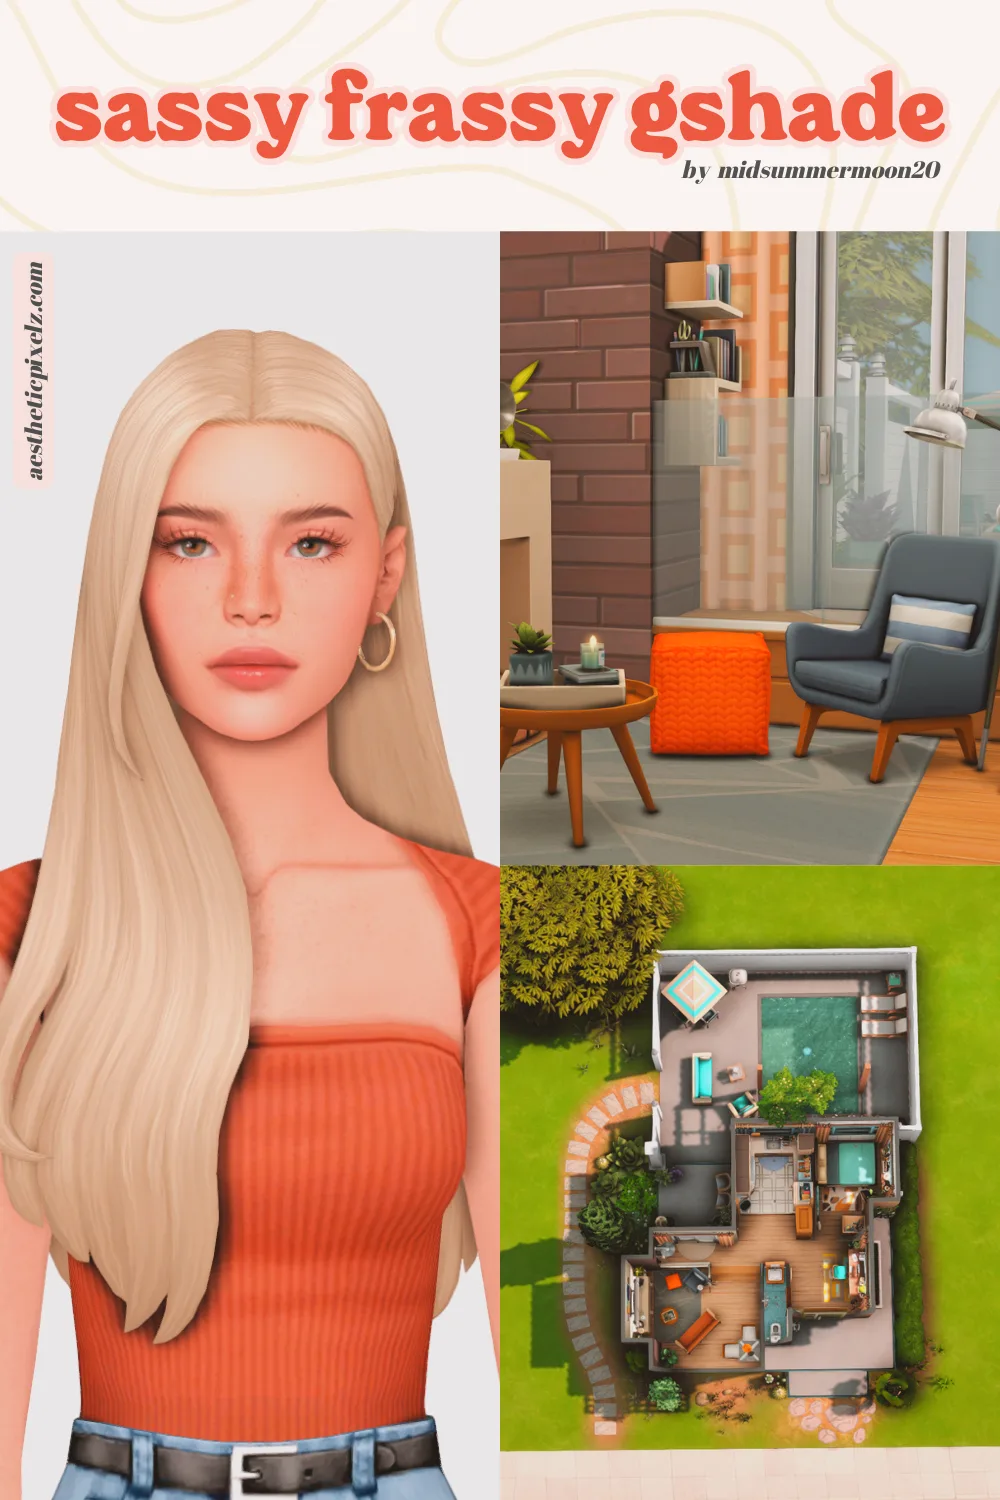 images showing off the sassy frassy gshade for the sims 4